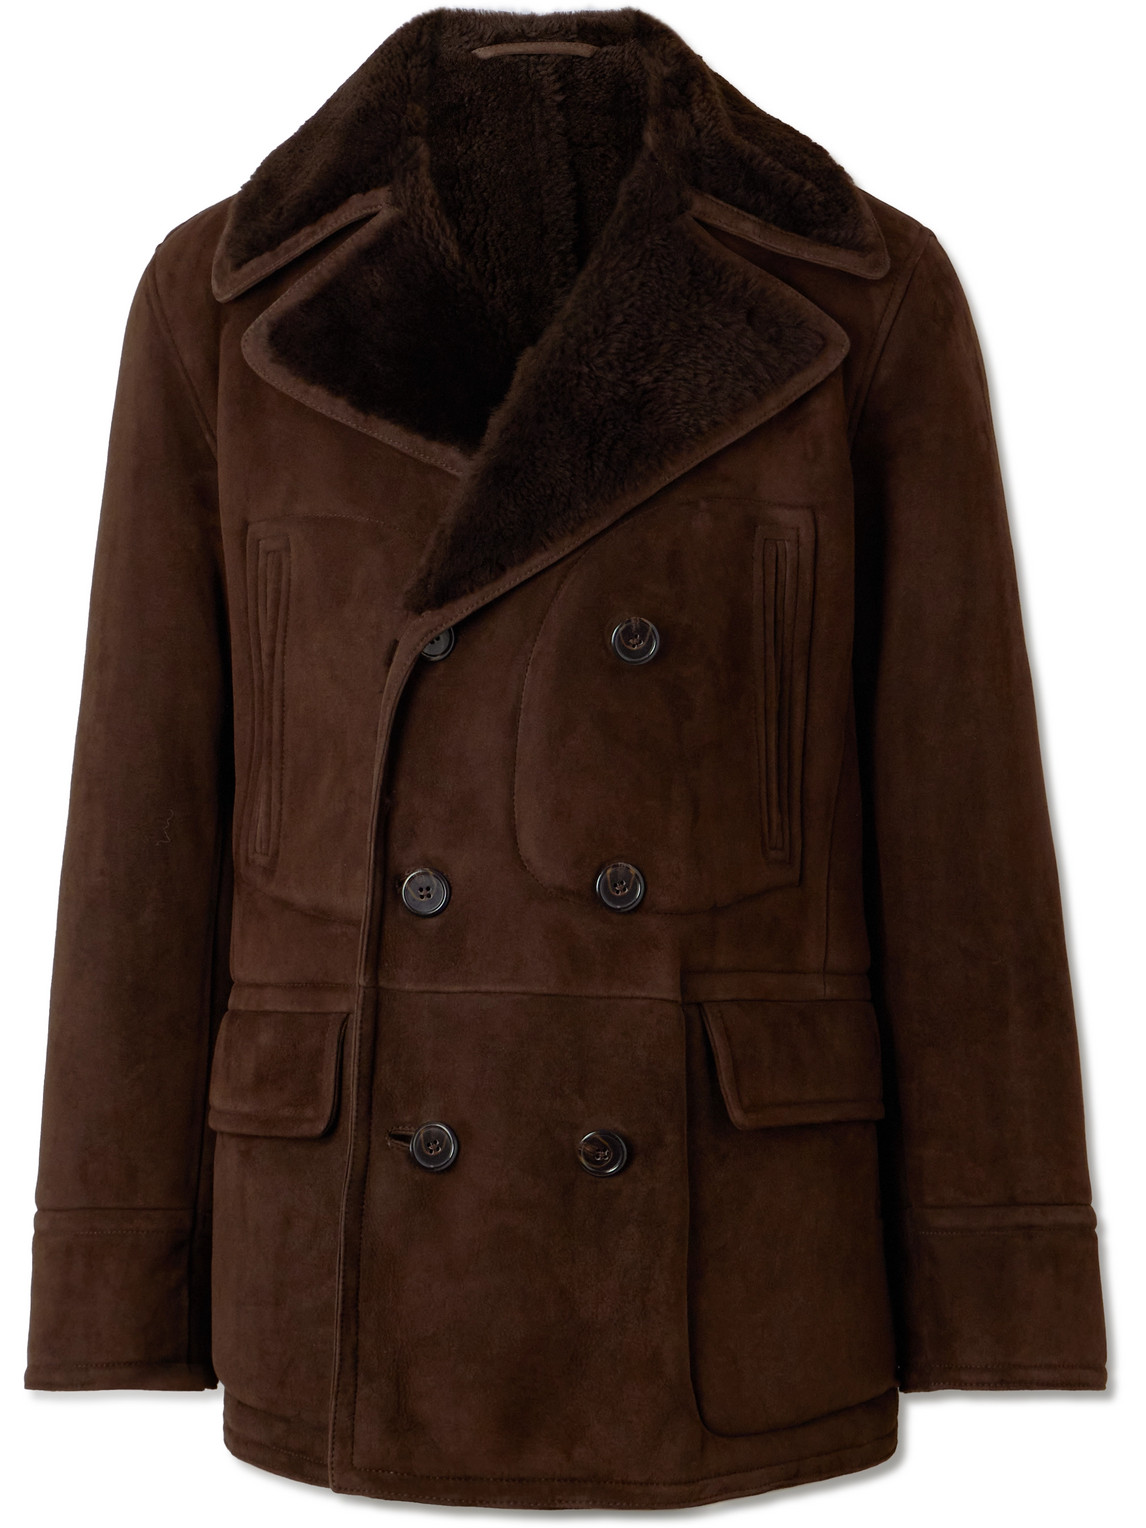 The Polo Double-Breasted Shearling Coat